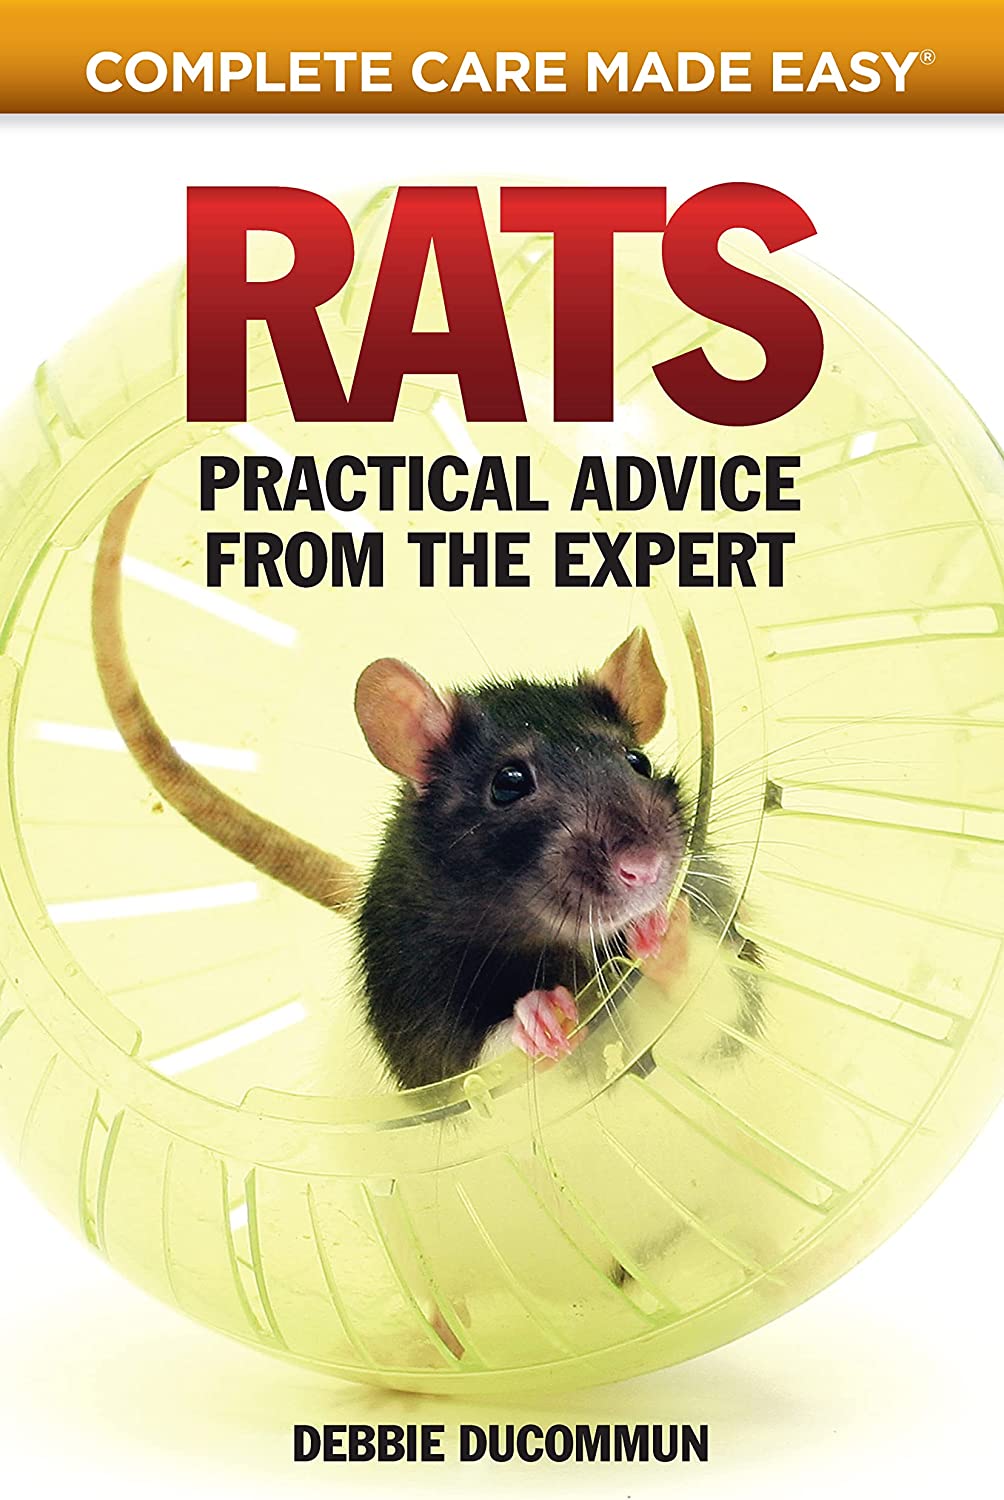 Rats: Practical Advice from the Expert (CompanionHouse Books) Choosing Your Pet, First Aid, Fun Activities, Tricks, Training Tips, Diet, Nutrition, Communication, and More (Complete Care Made Easy)